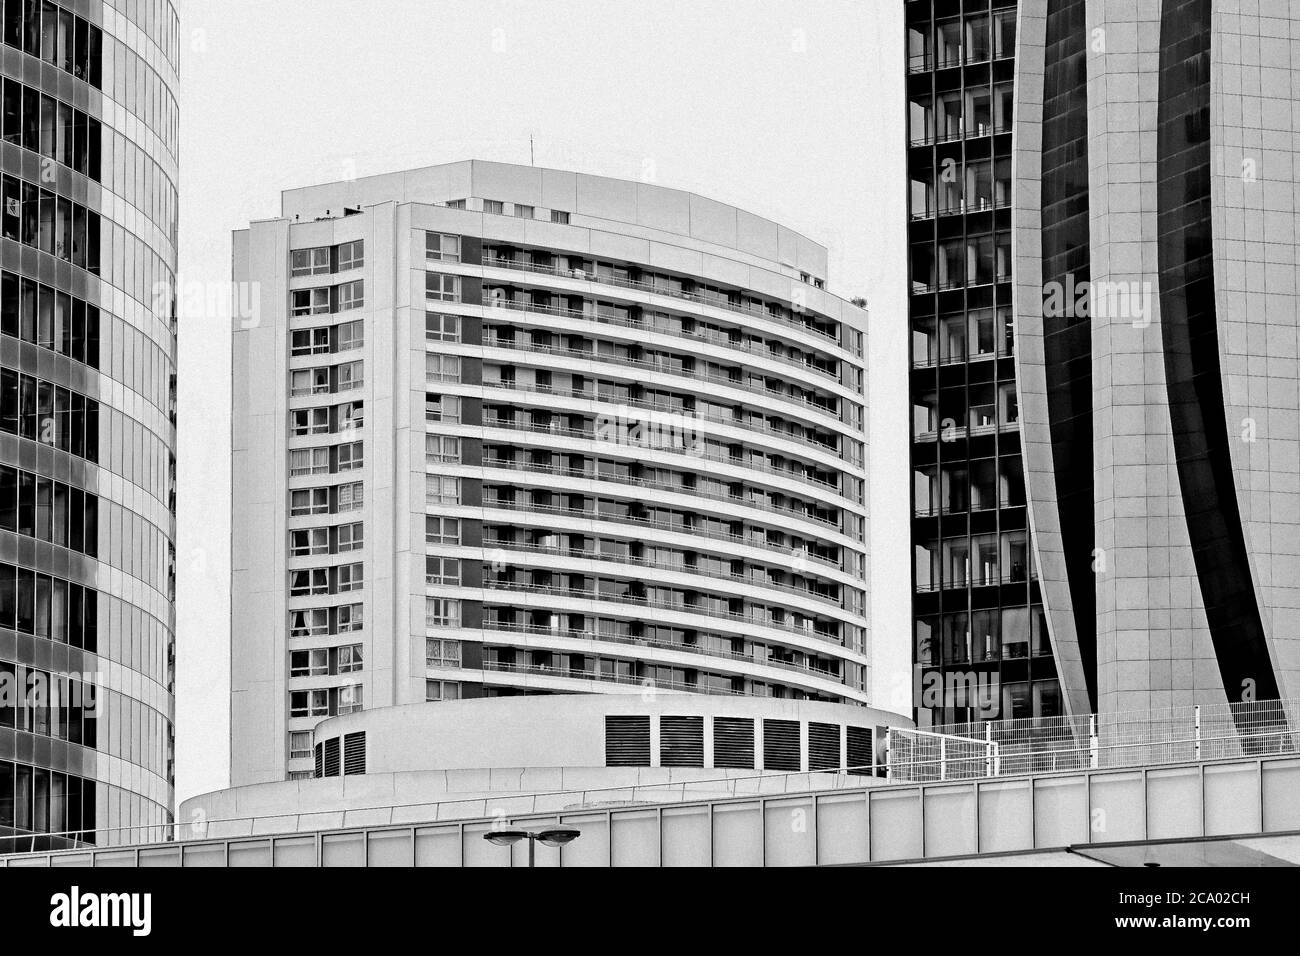 La defence Black and White Stock Photos & Images - Alamy